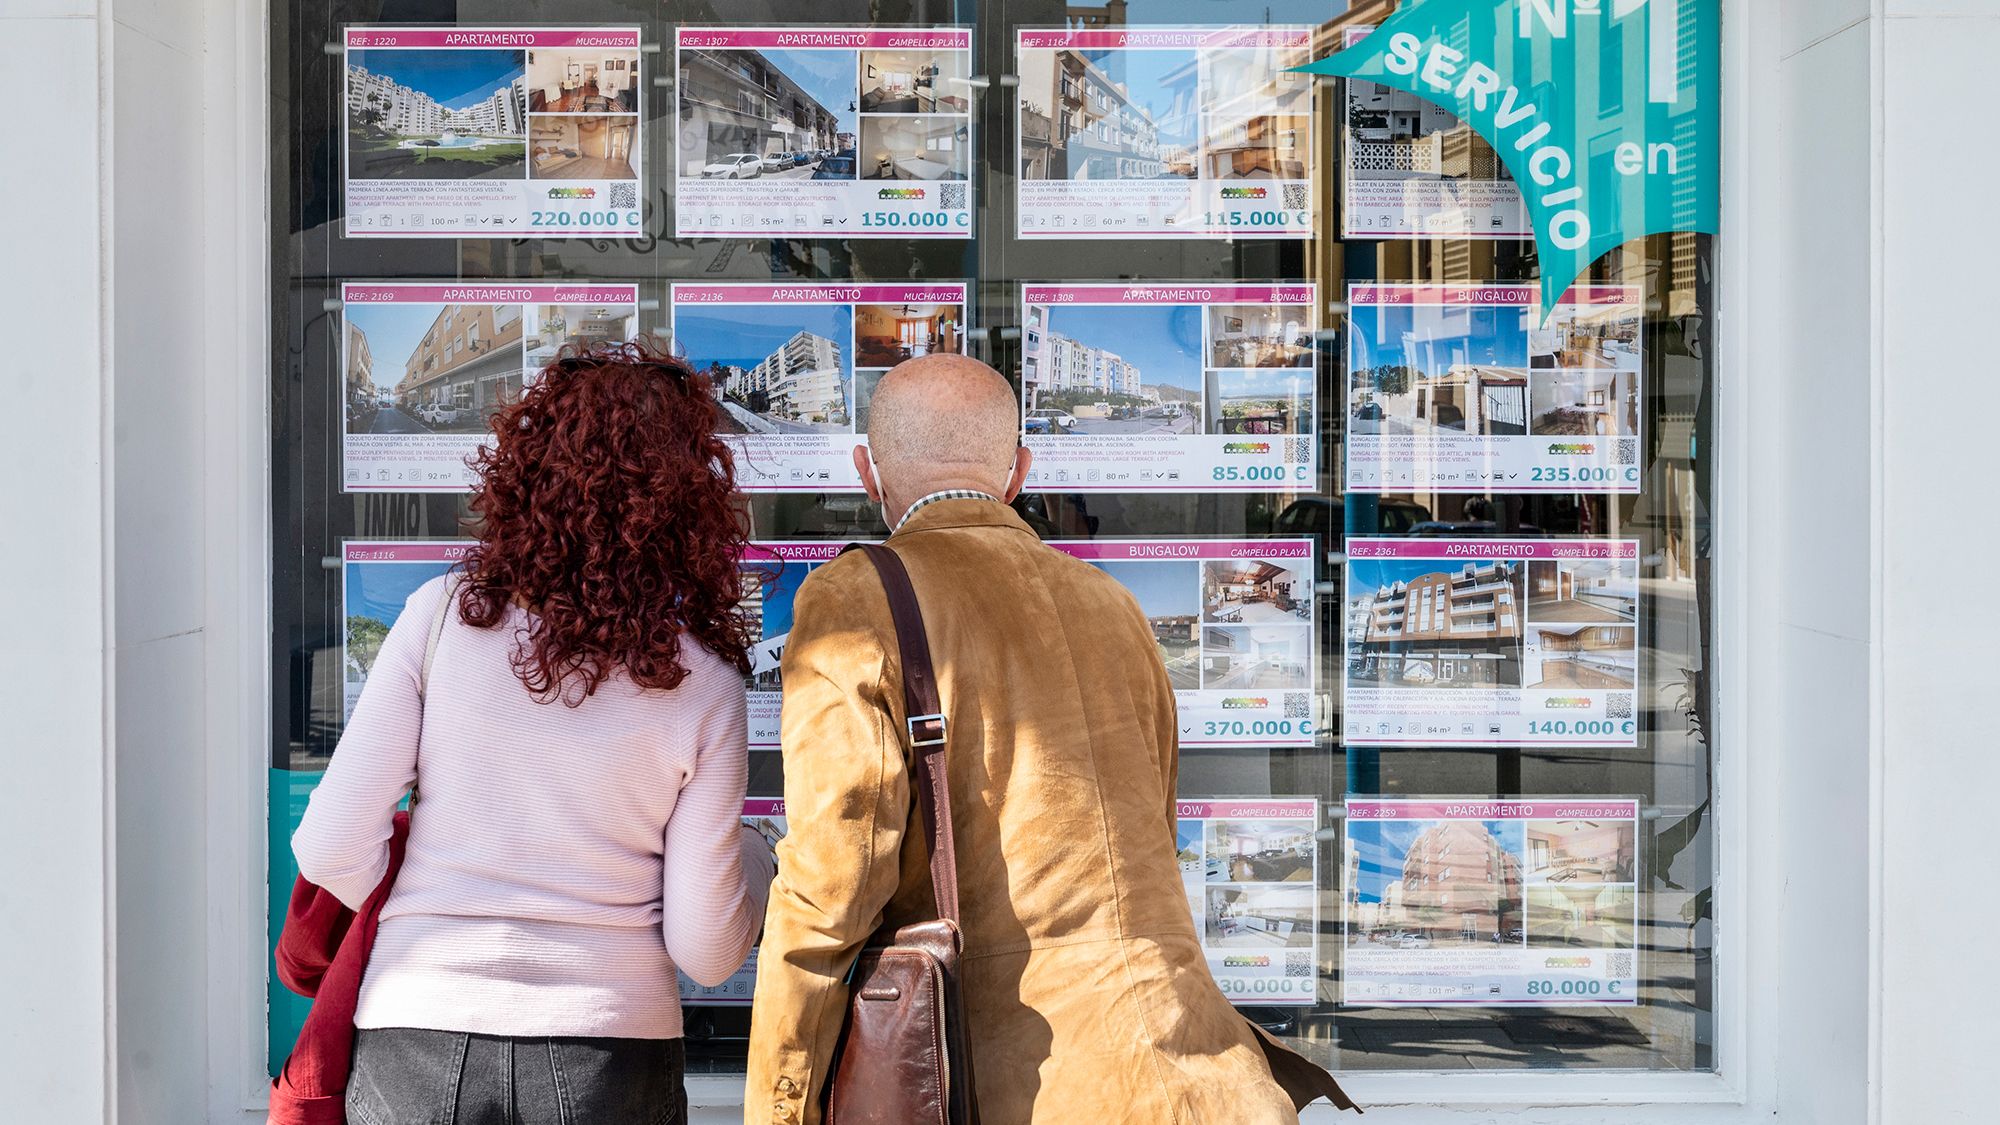 A couple looks at houses for sale and rent in Alicante, Spain, in March 2022.